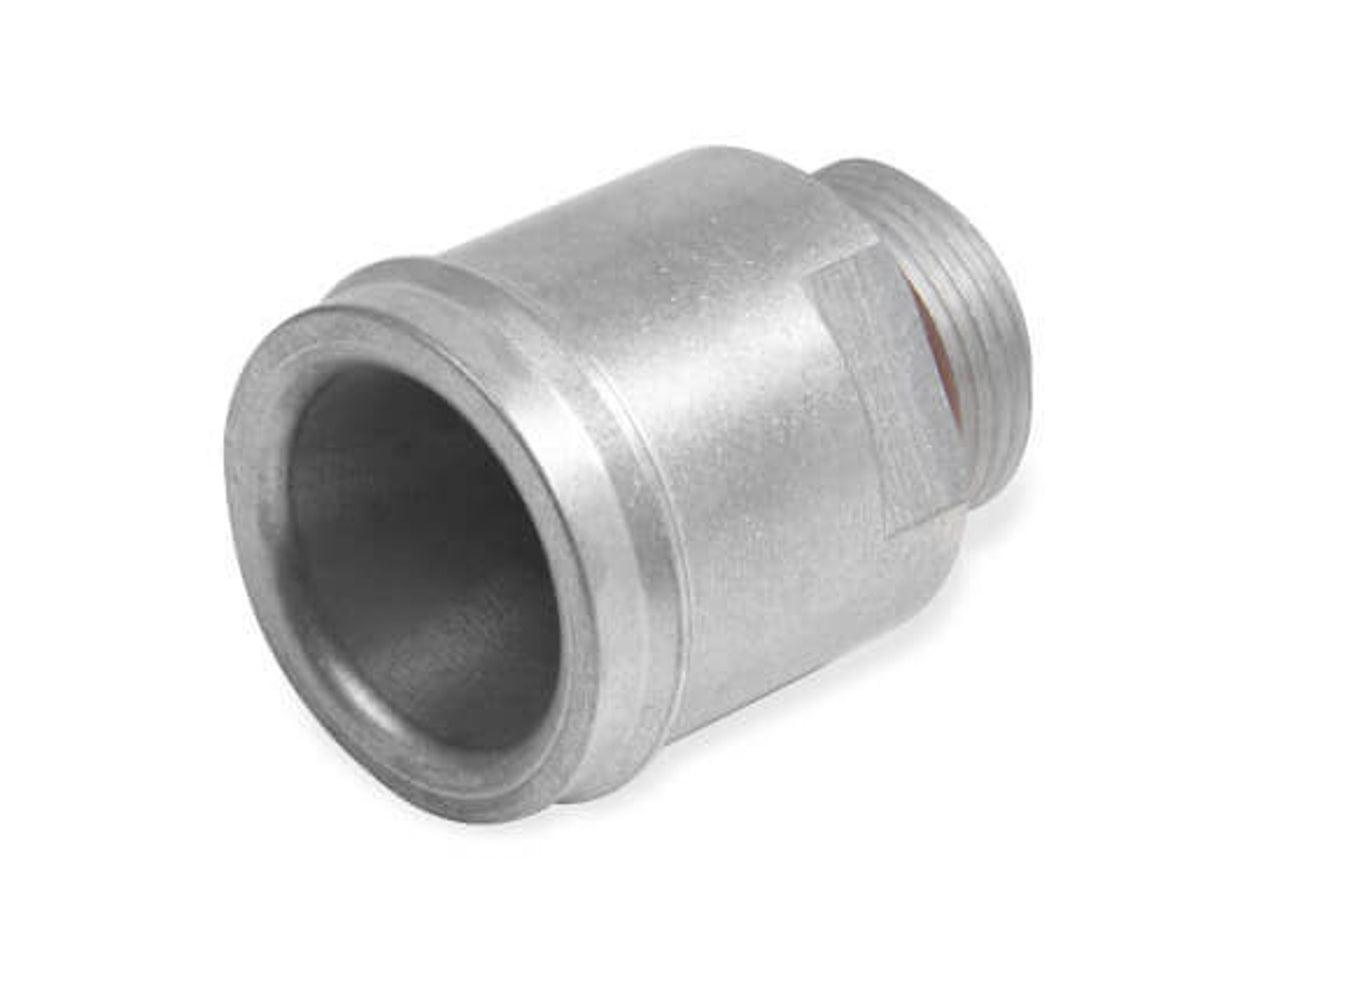 Radiator Hose Fitting 1.75in to 16an ORB - Burlile Performance Products